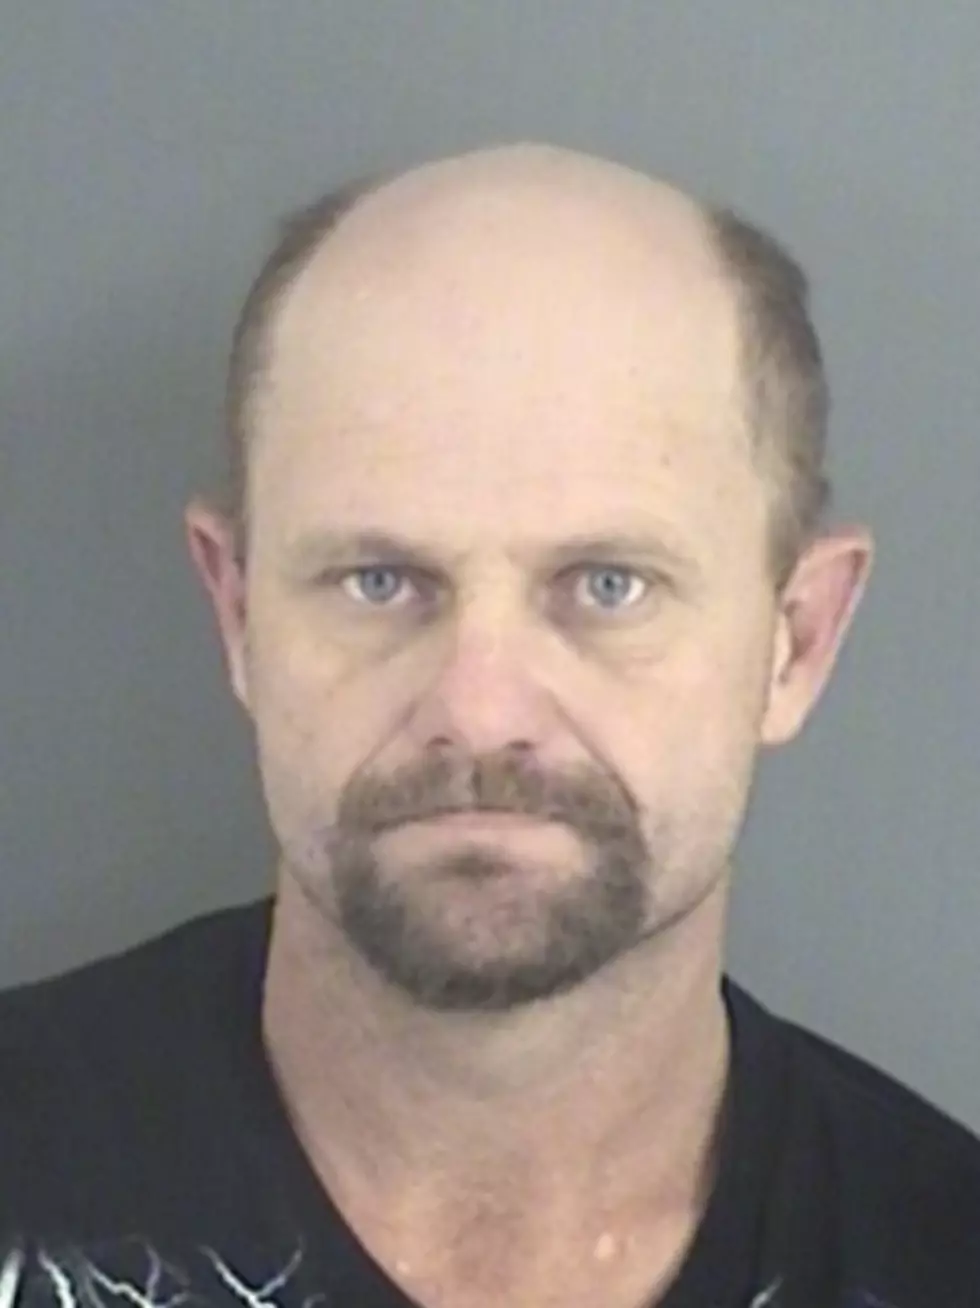 Diboll Man Suspected of Damaging Local Businesses Arrested